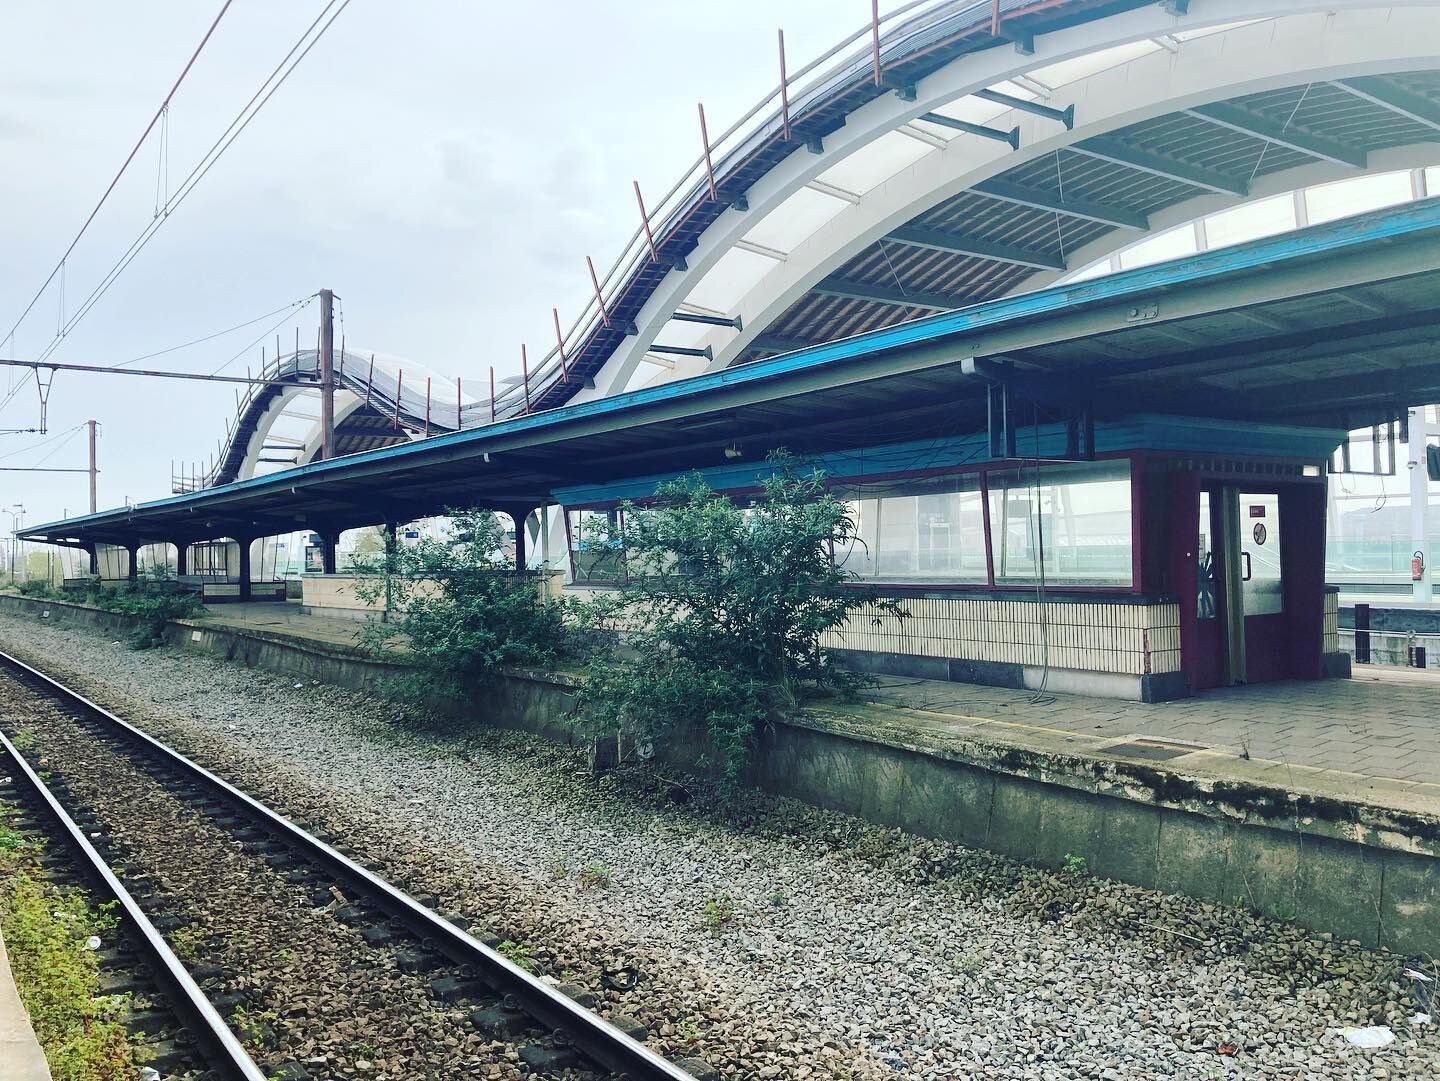 &ldquo;Life finds a way&rdquo;.
.
.
Its been about 3 years since this track of the @stadmechelen trainstation was left unused, behind it you see the new arches of the tracks of the new station rising up behind it. The plants bursting up trough the tr